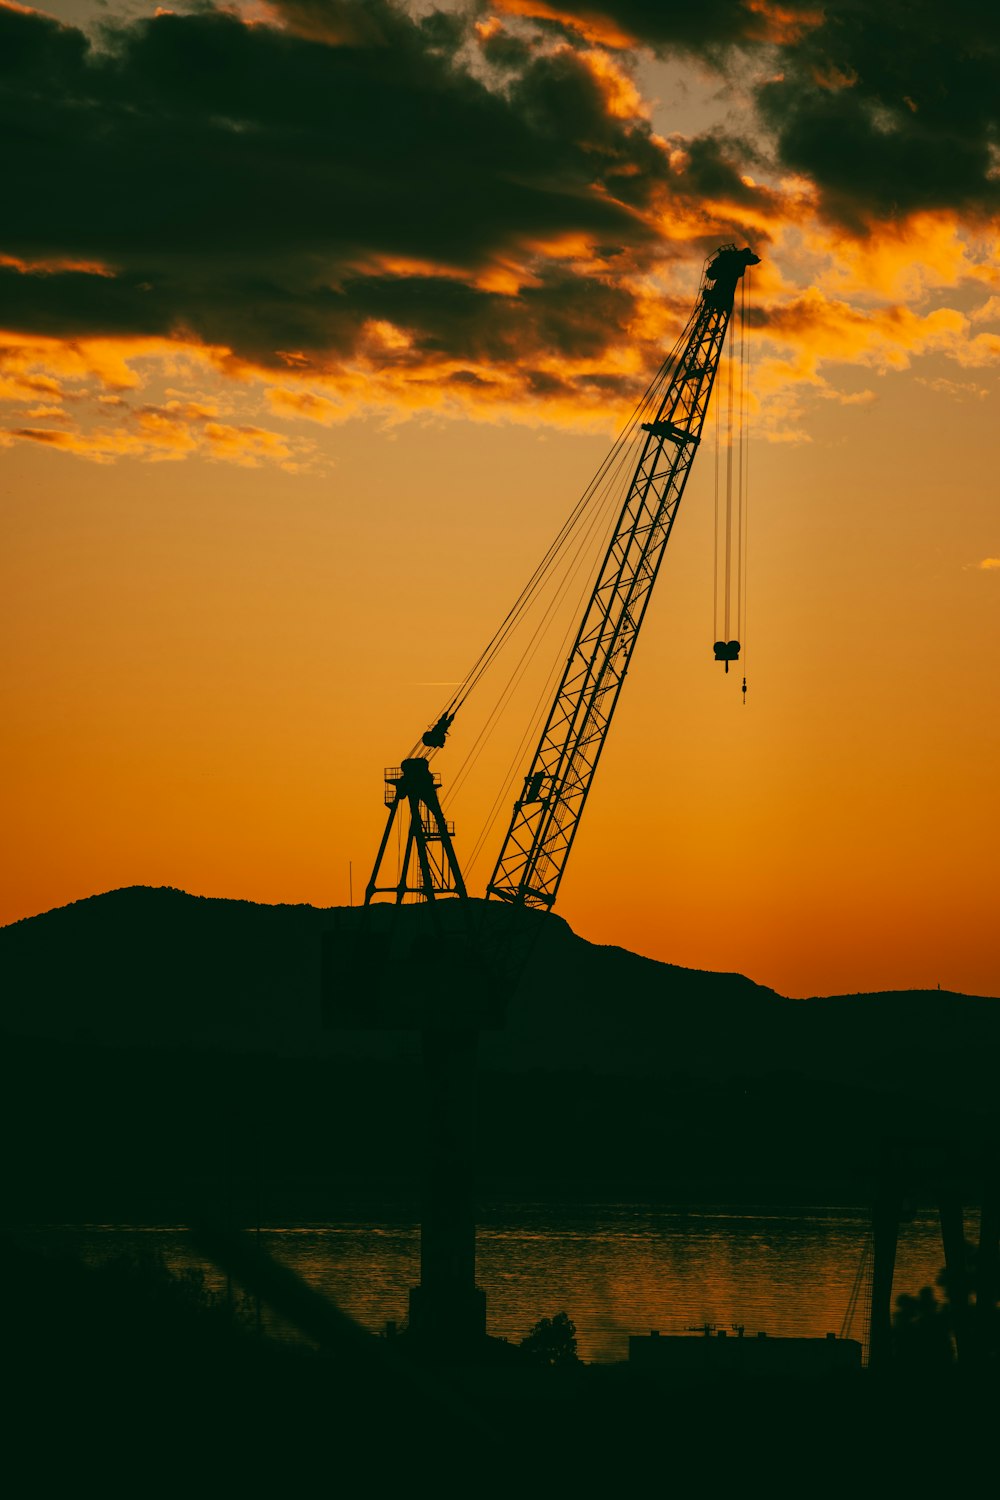 a crane is silhouetted against a sunset sky